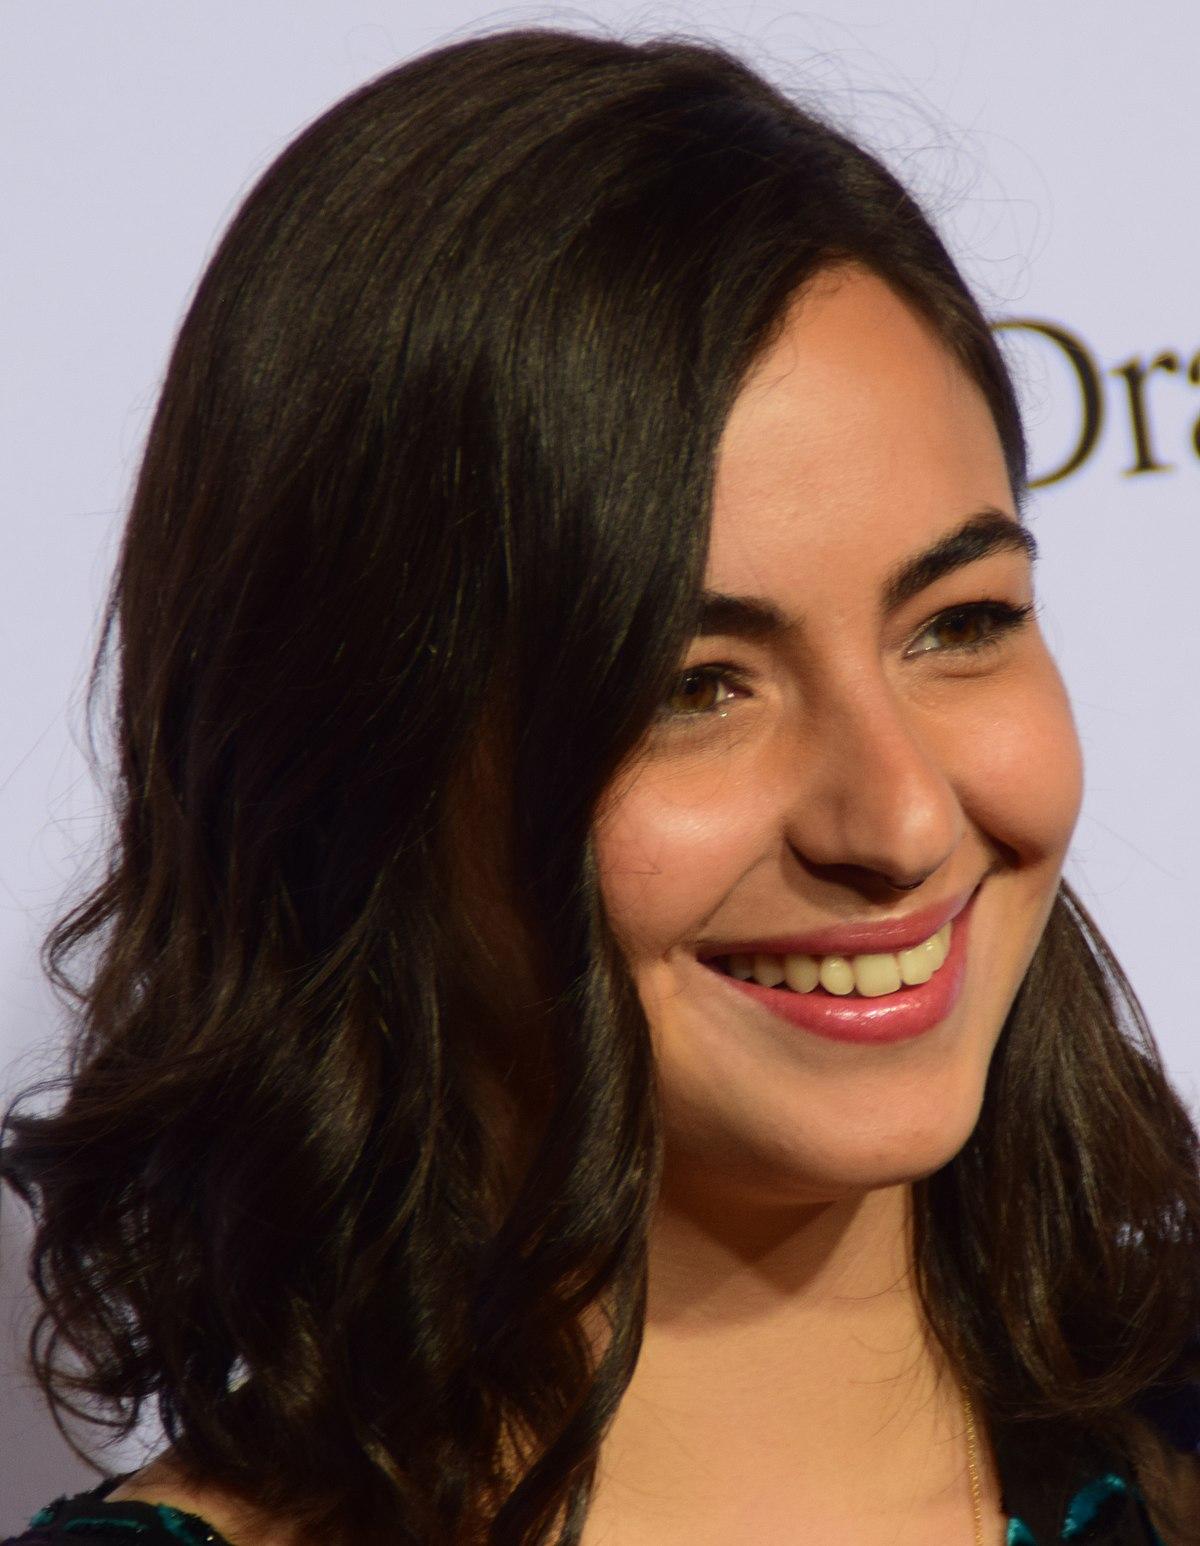 70+ Hot Pictures Of Alanna Masterson Which Are Here To Rock Your World 23